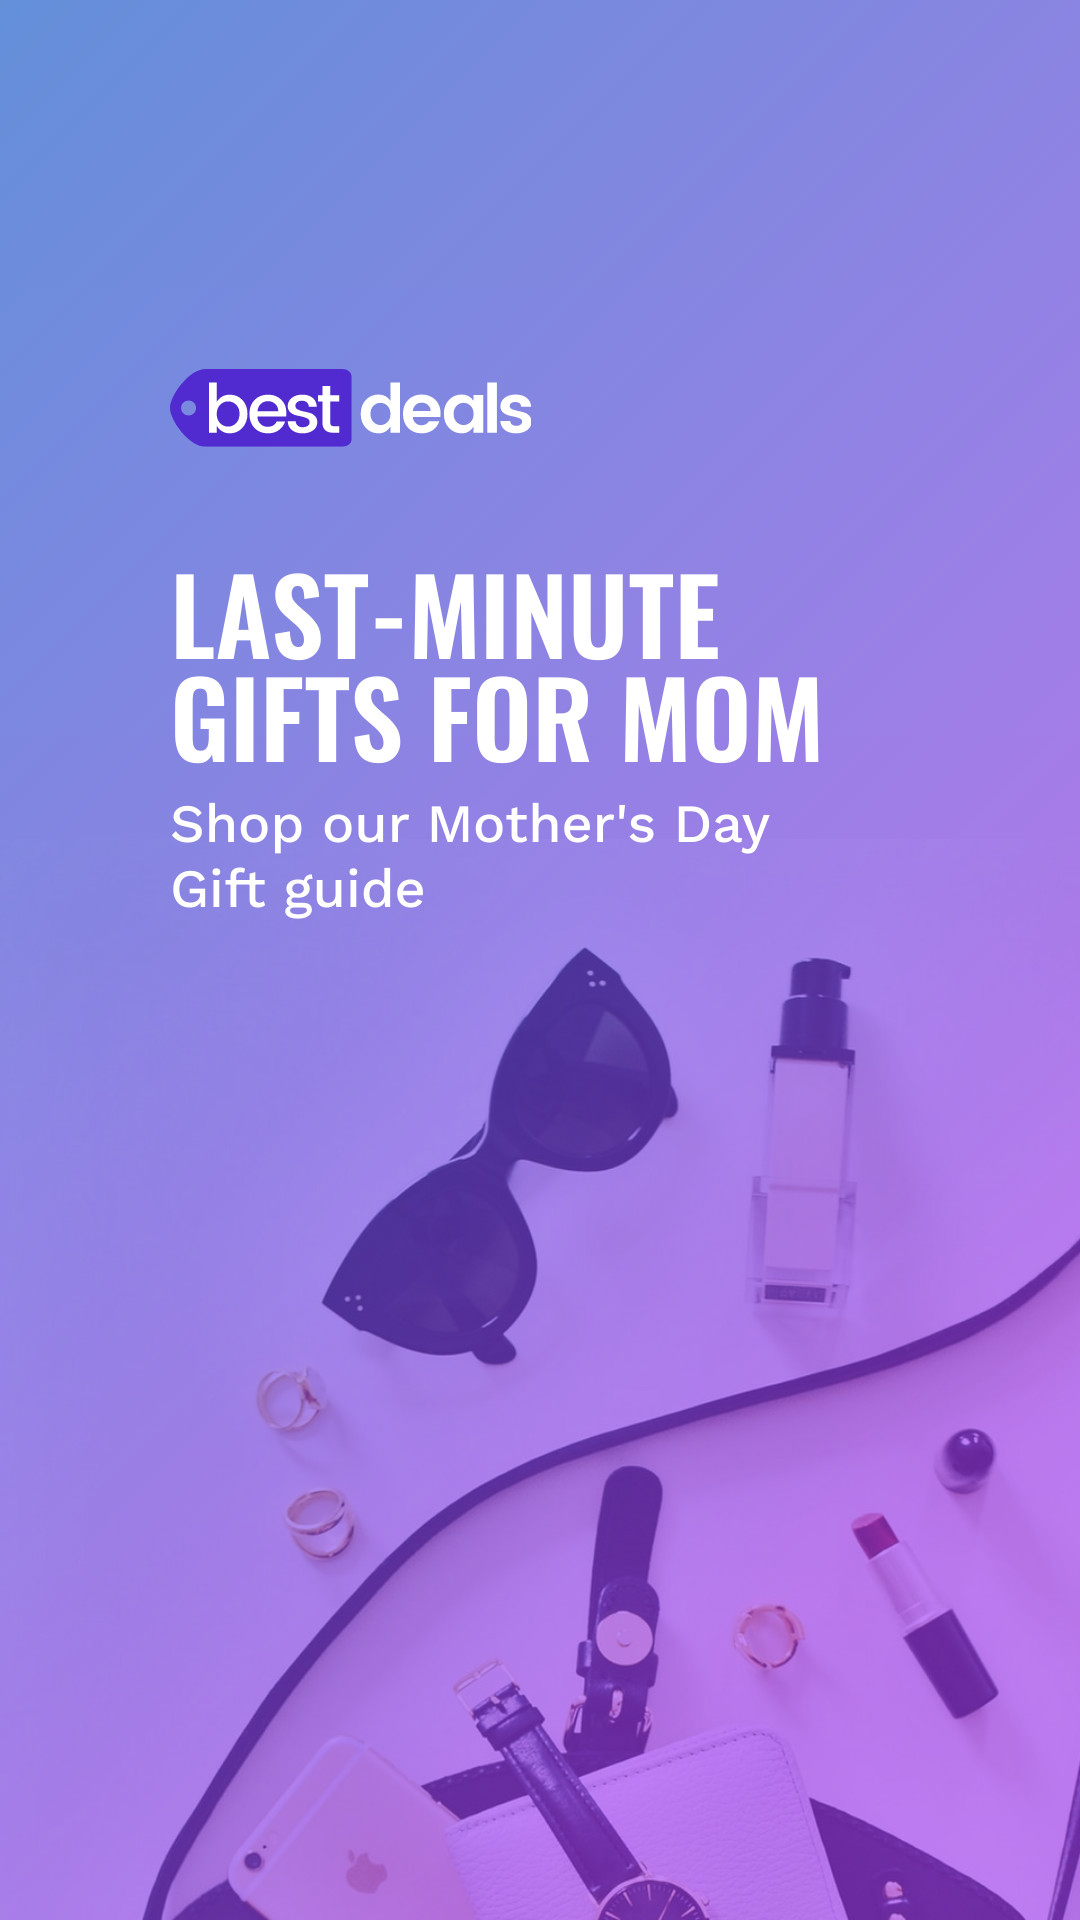 Mother's Day Last Minute Gifts